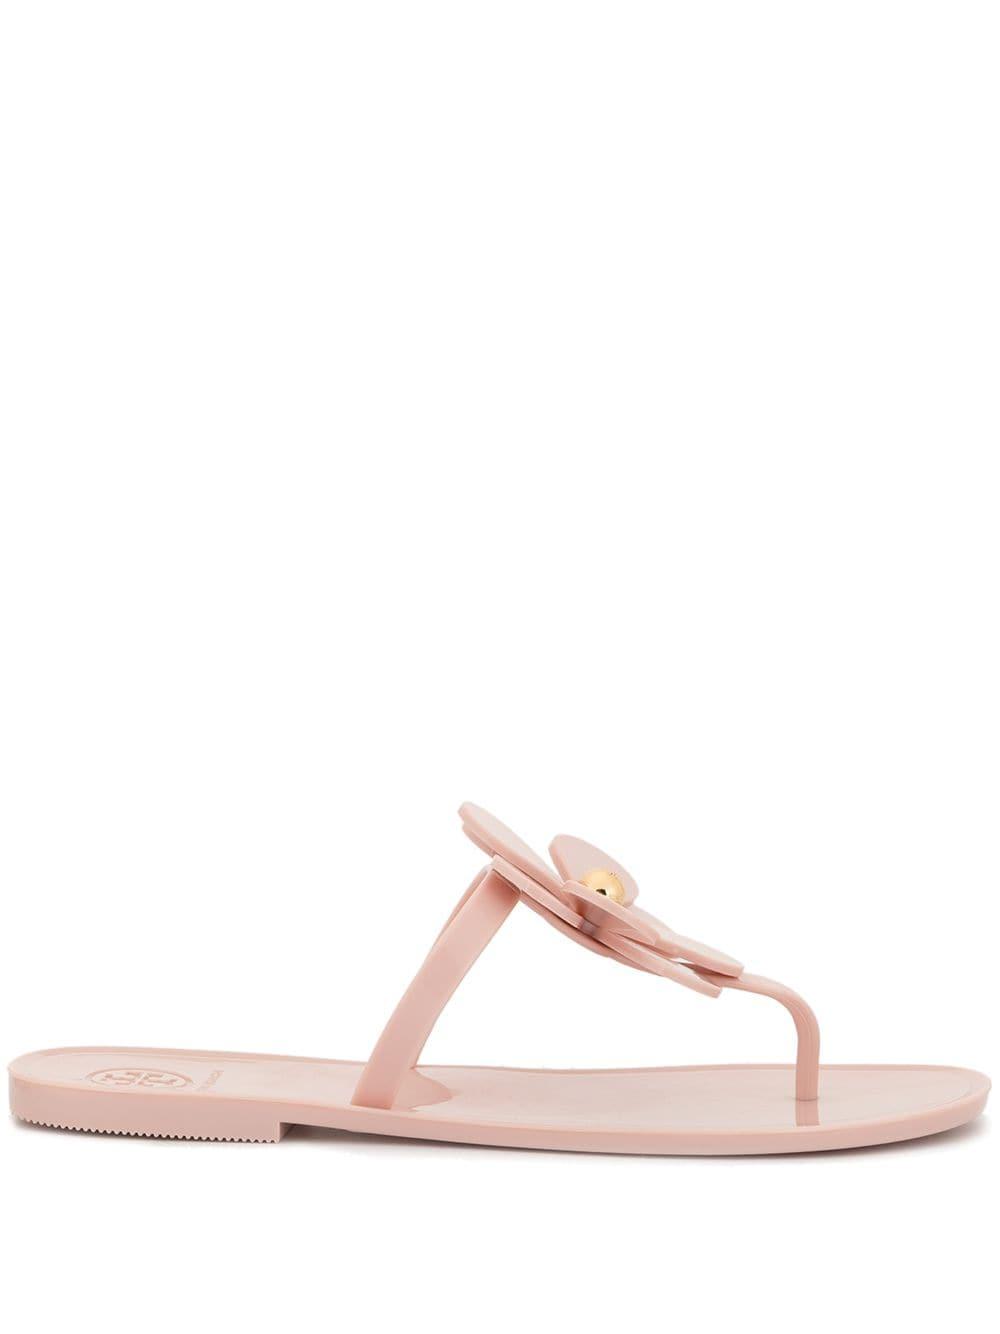 Tory Burch Flower Jelly Sandals in Pink - Save 44% - Lyst